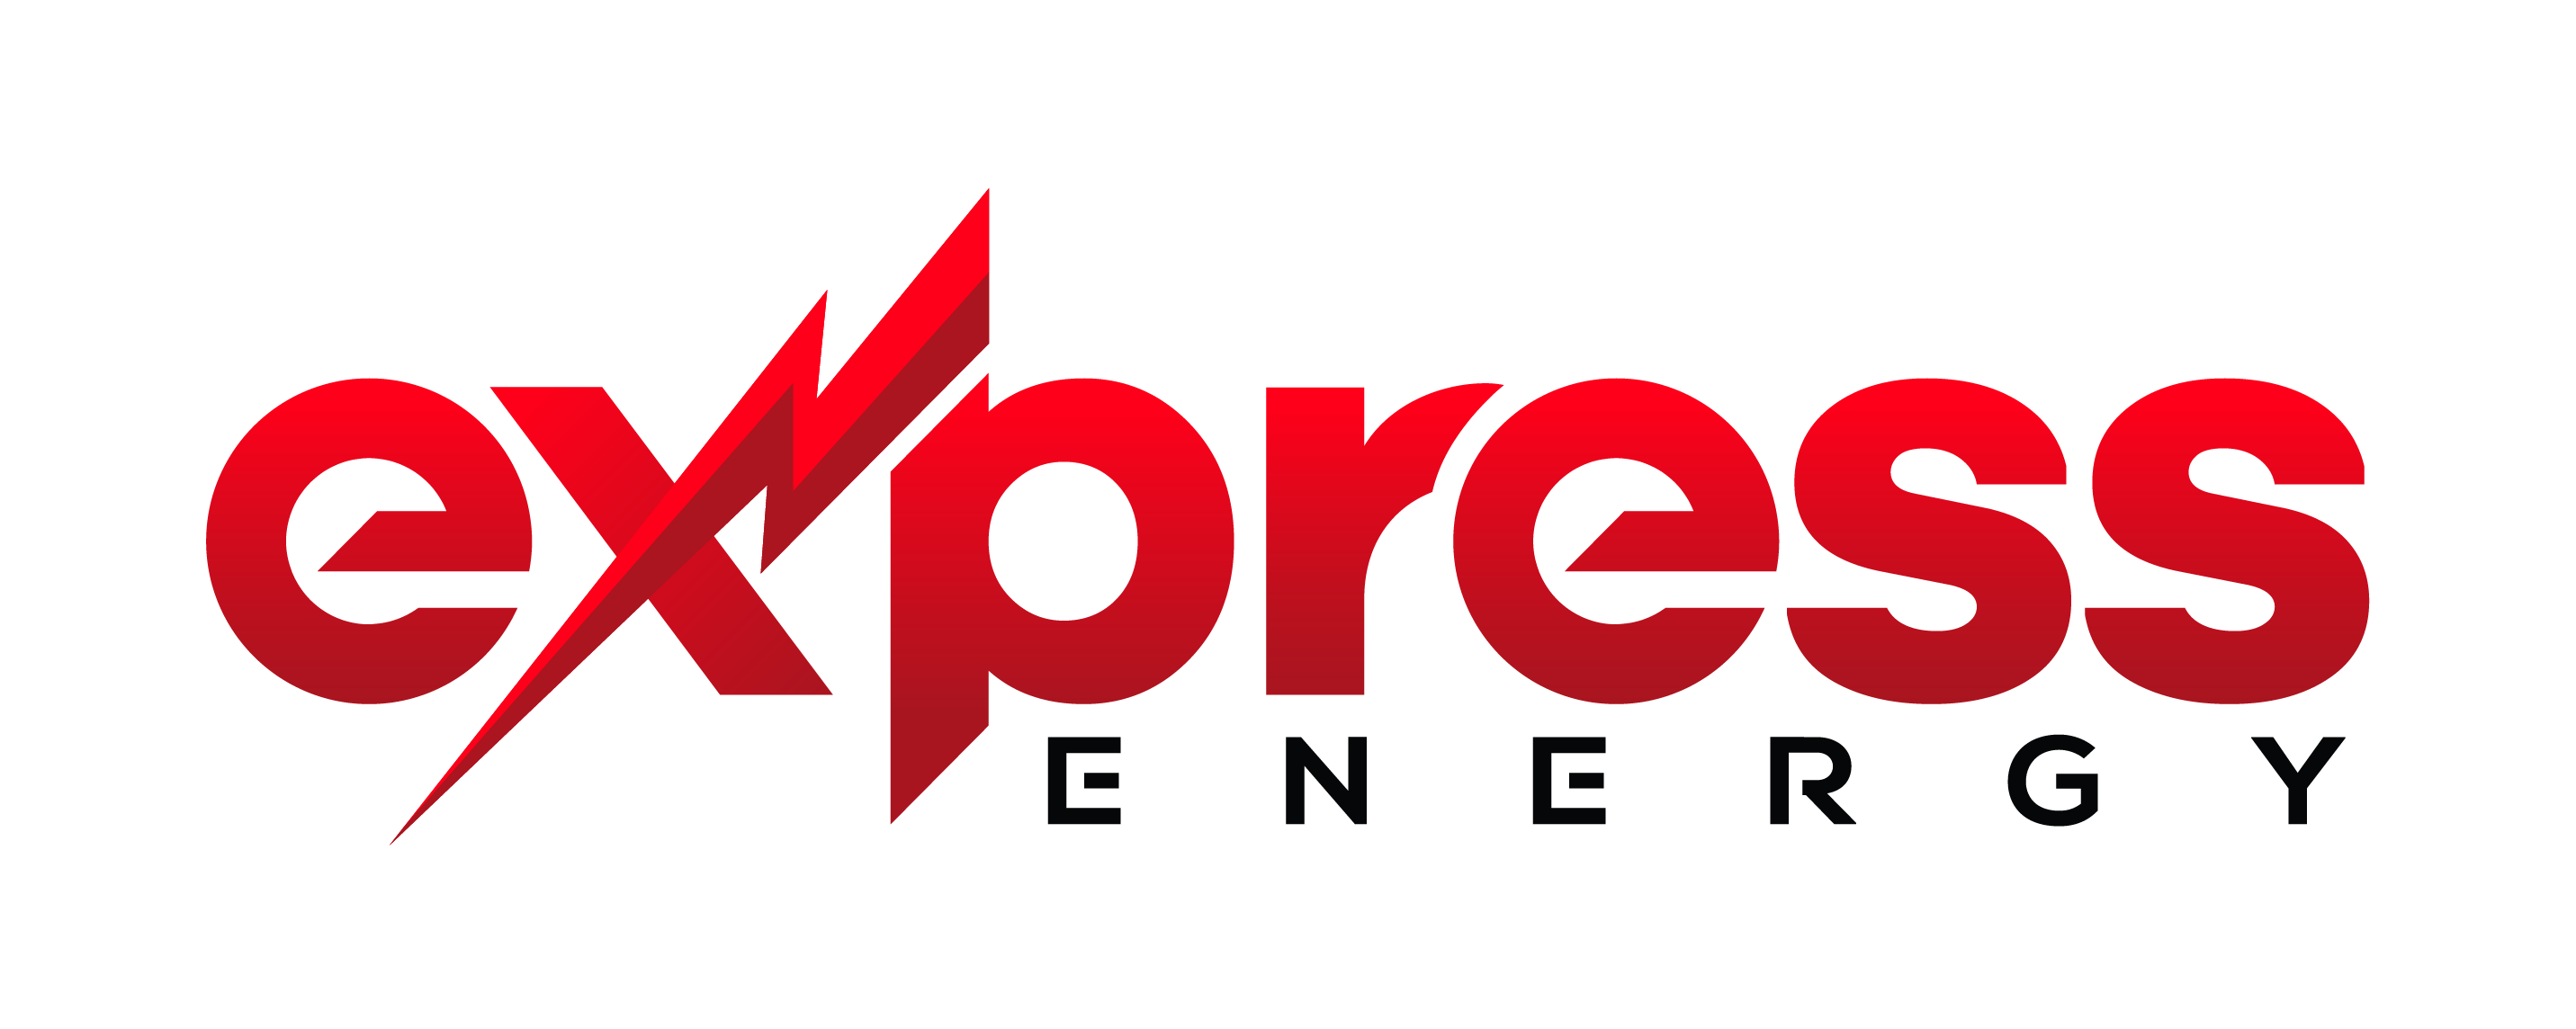 Express Energy Review, Electricity Rates and Plans